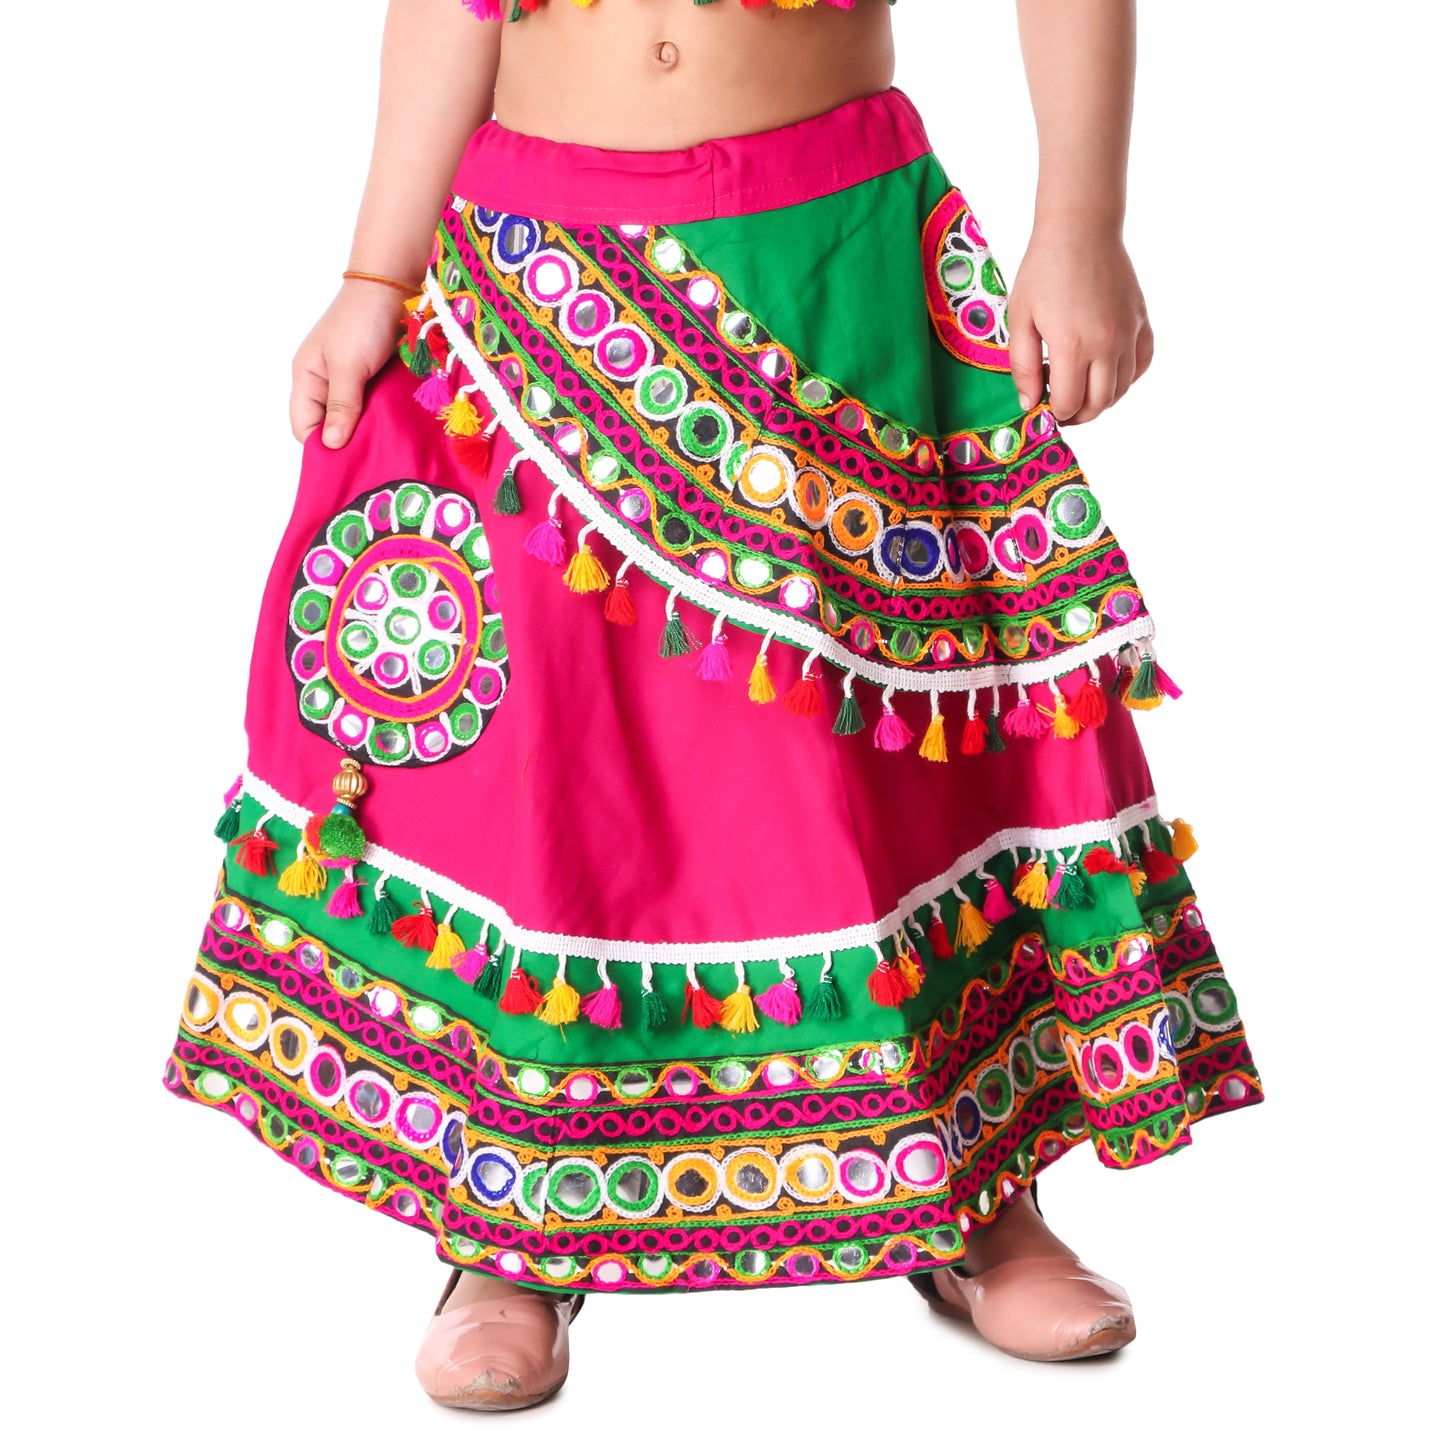 Multicolor Pink and Green Lehenga Choli for Girls - Ages 0-16Y - Kutch Work